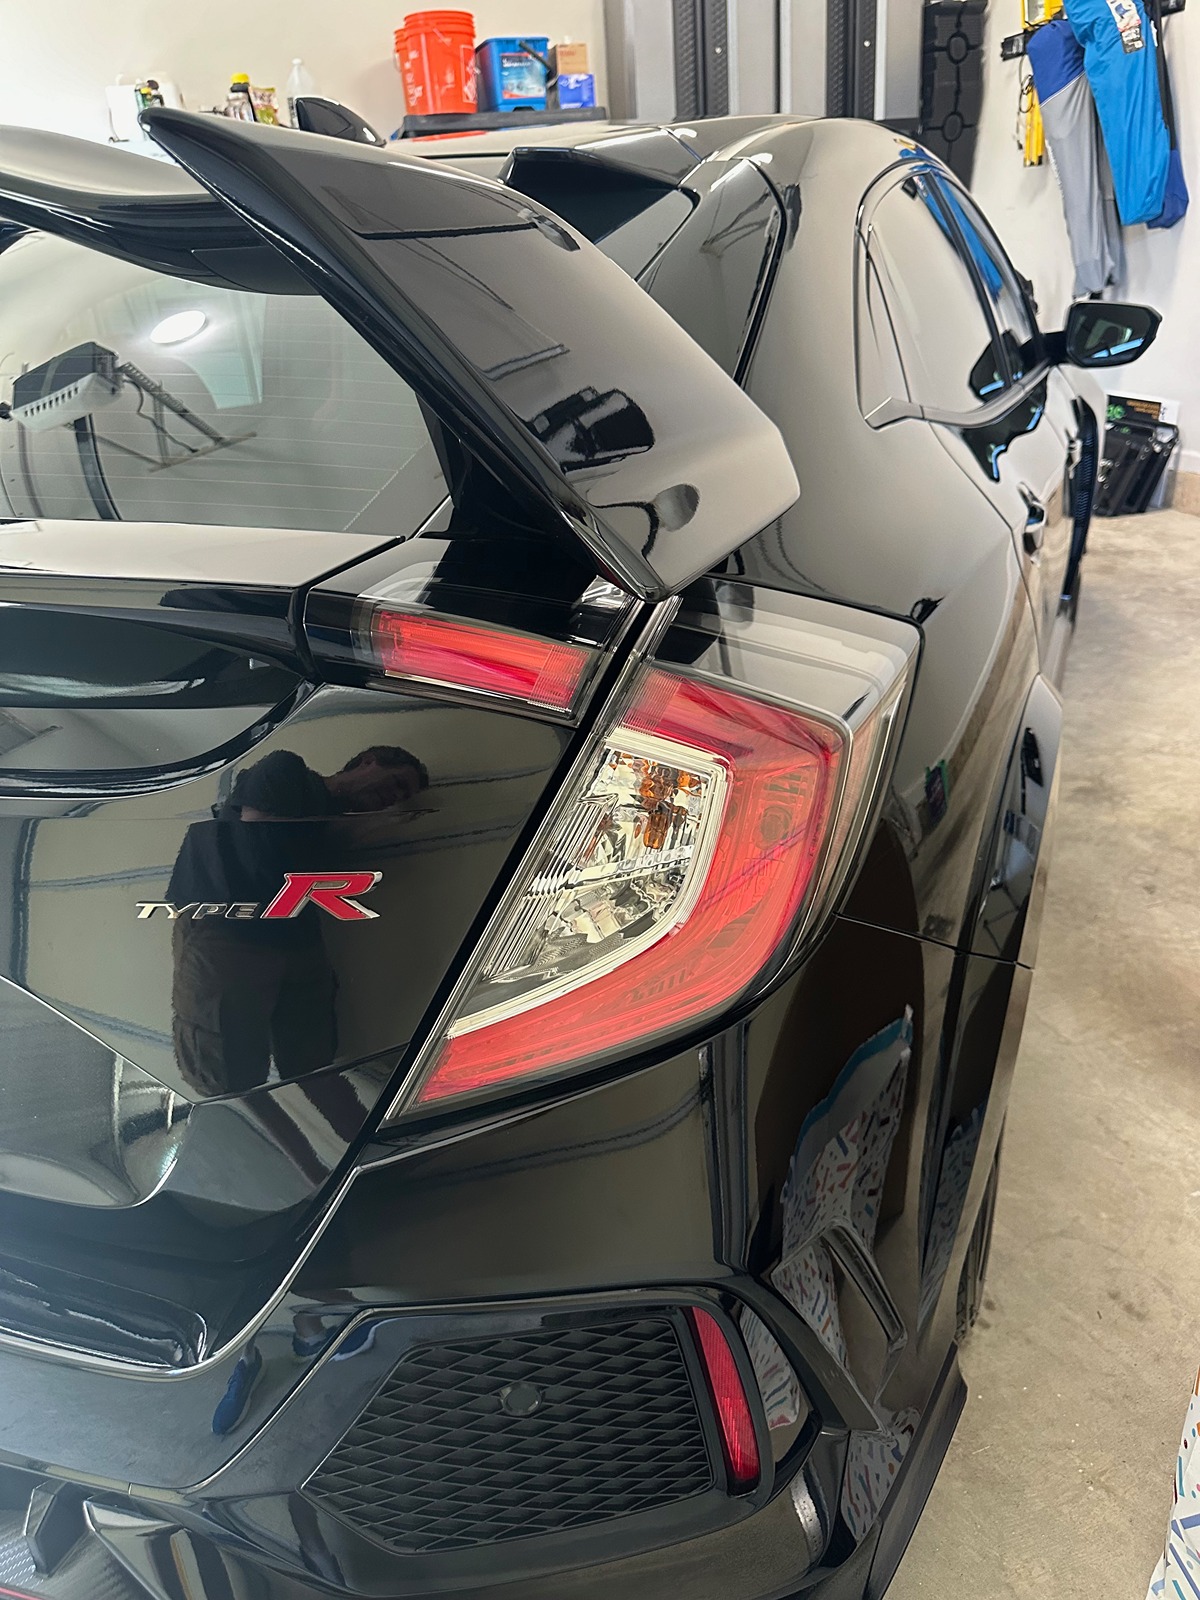 Honda Civic 10th gen Sold. 2019 Civic Type R for sale IMG_8219